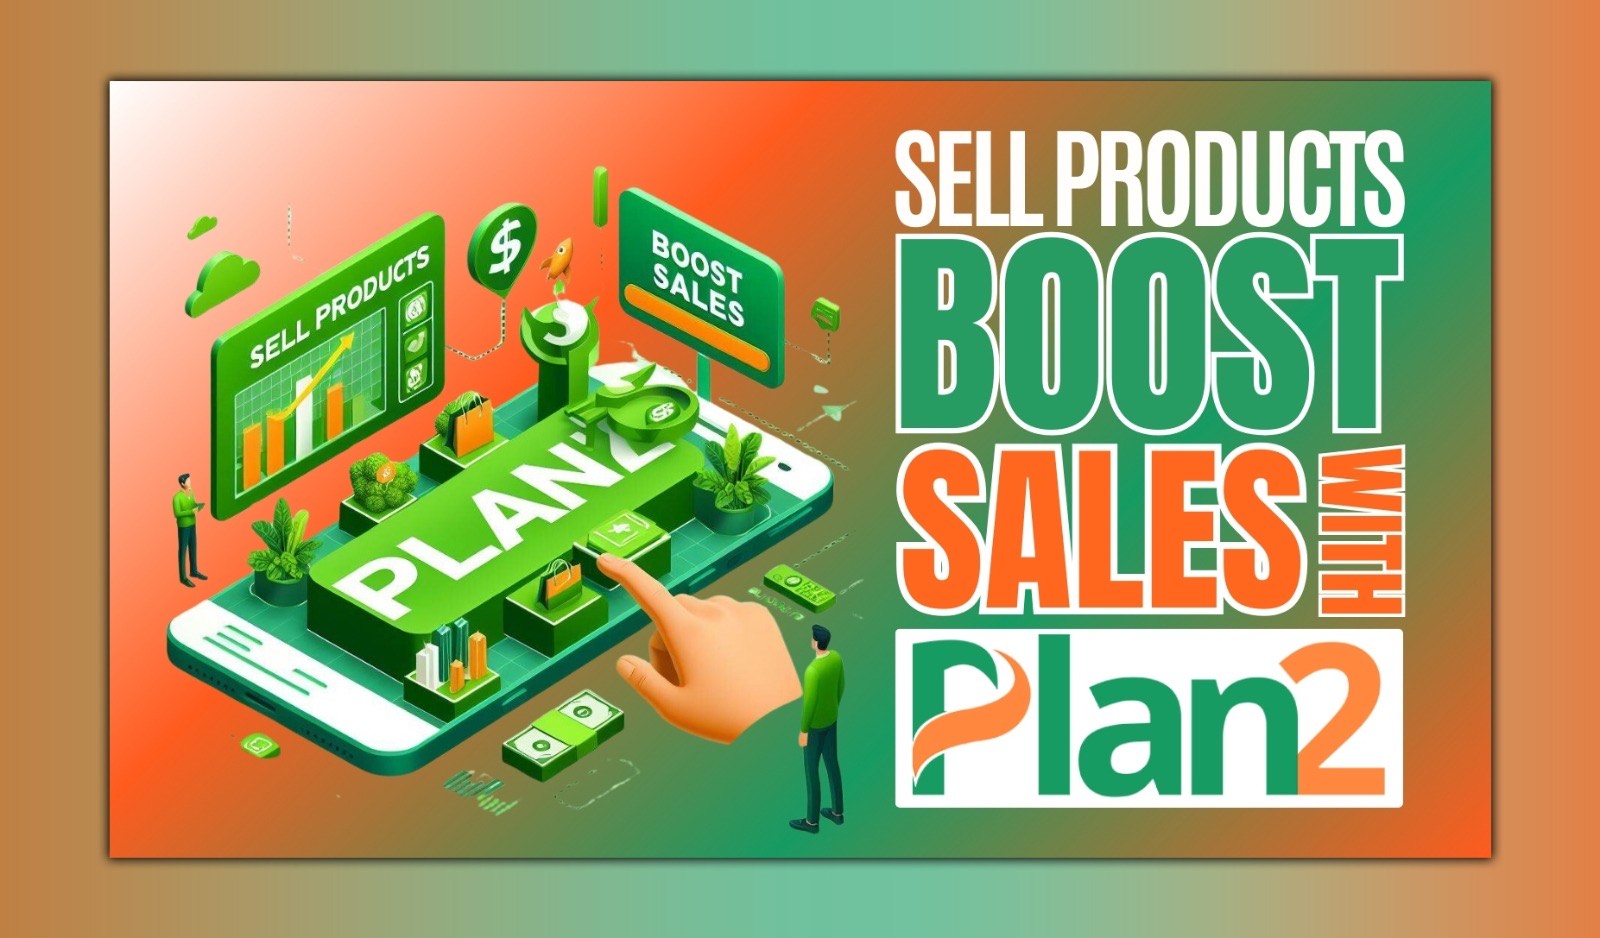 Sell products, boost sales